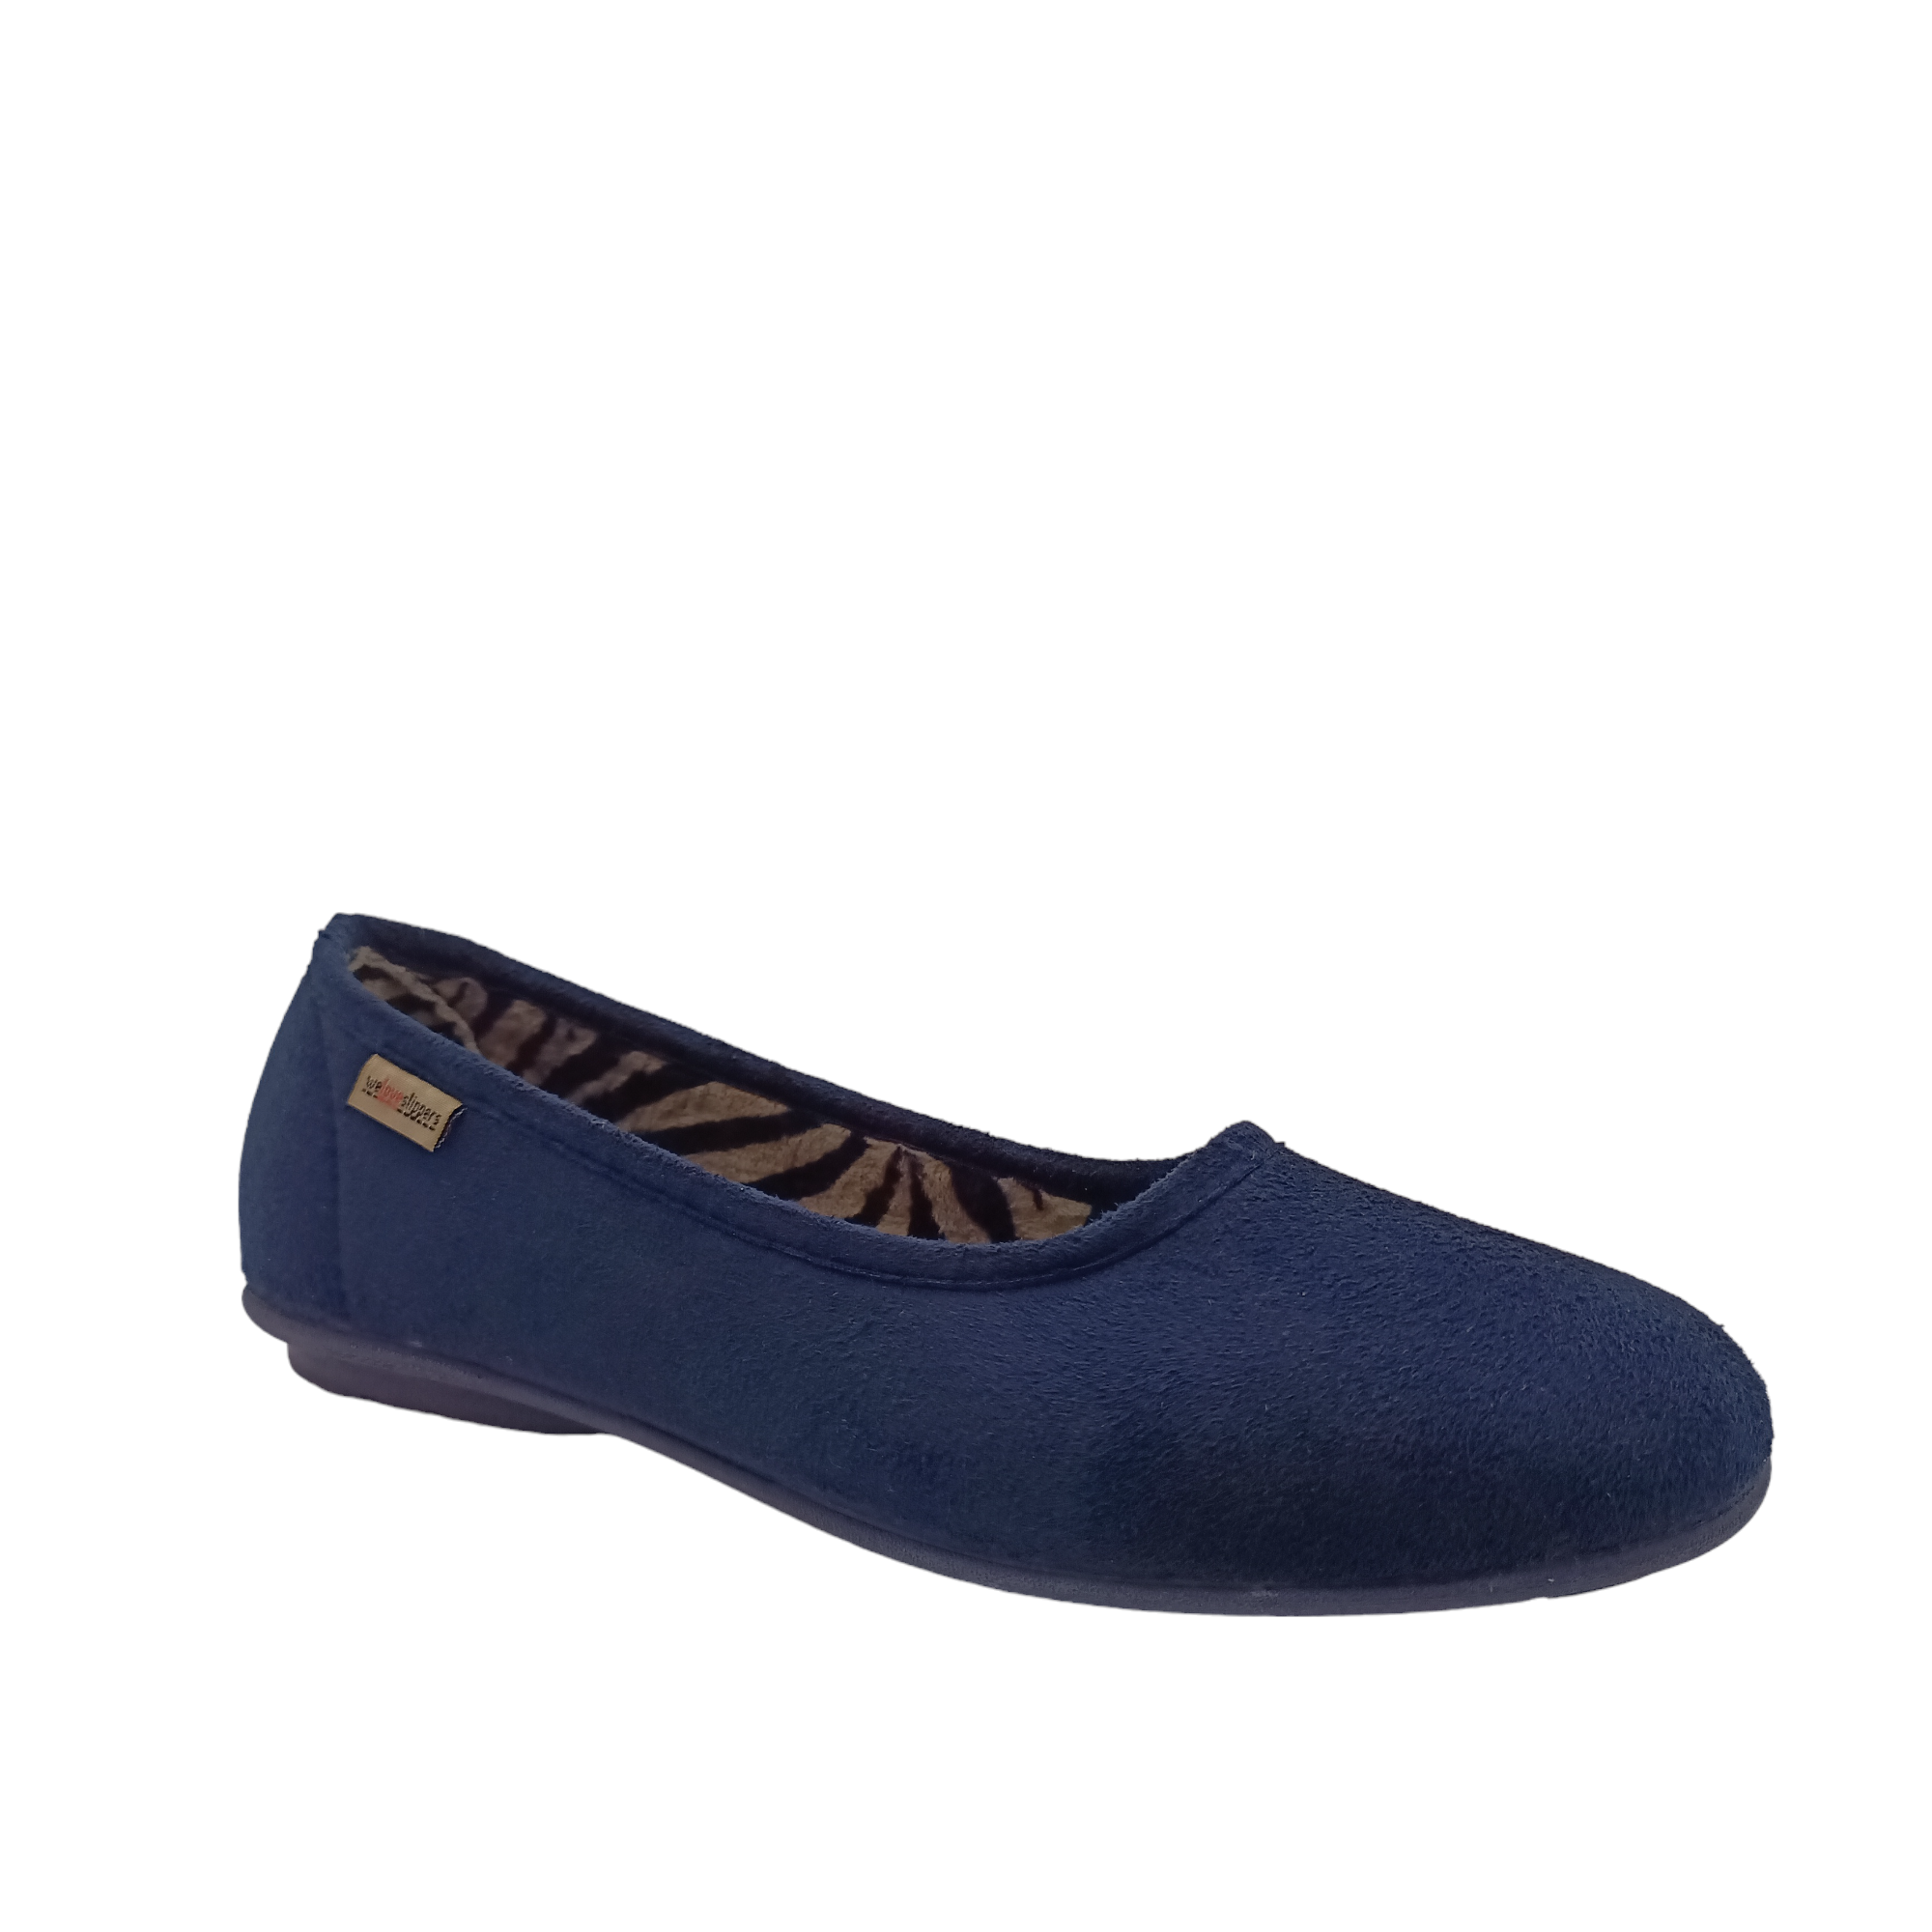 Front view of navy Nuzzle Slippers with zebra print lining. Shop Womens Slippers and Shoes Online and In-store with shoe&amp;me.